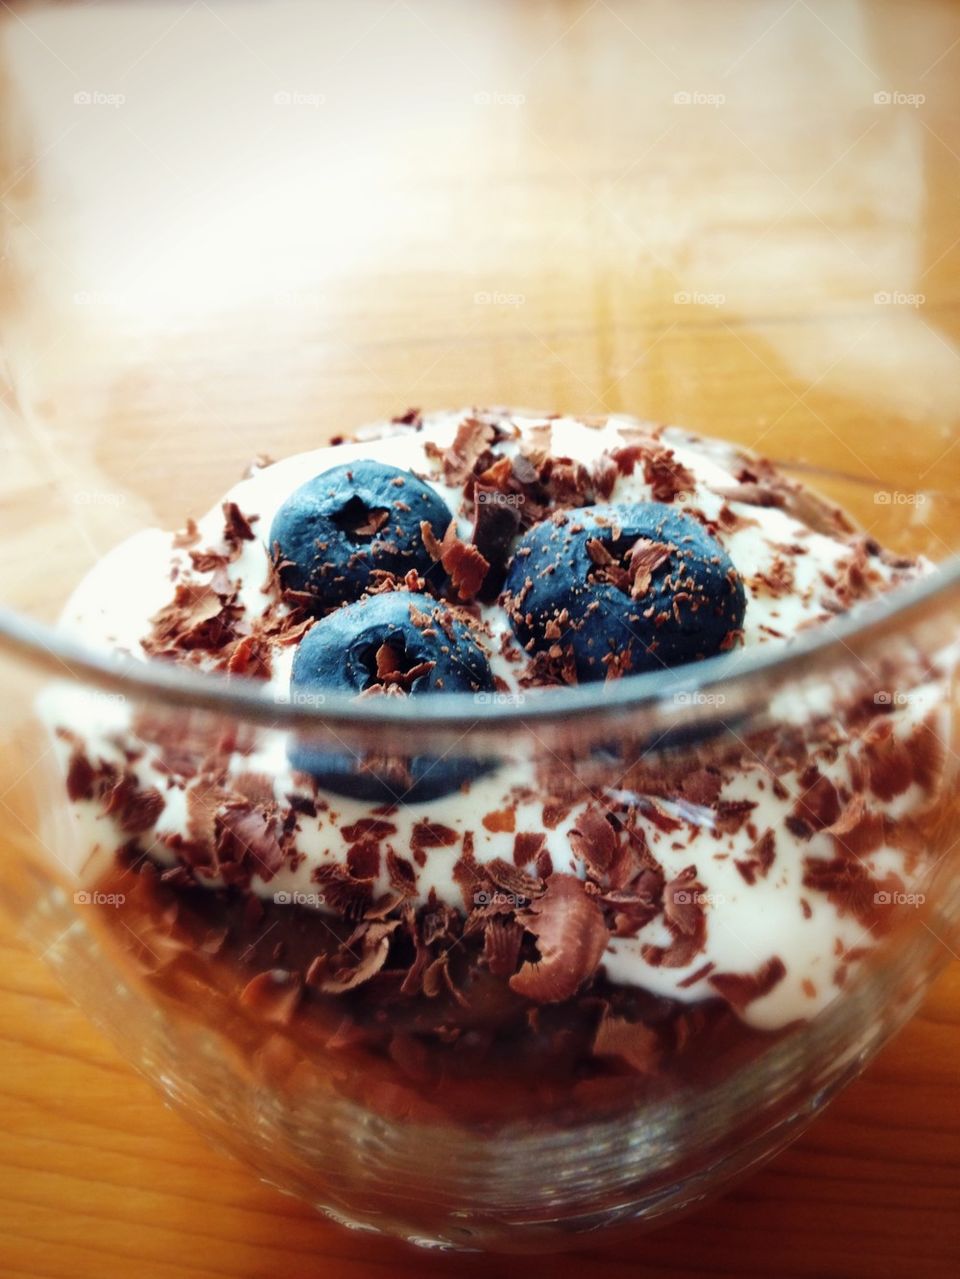 Chocolate mousse with blueberries